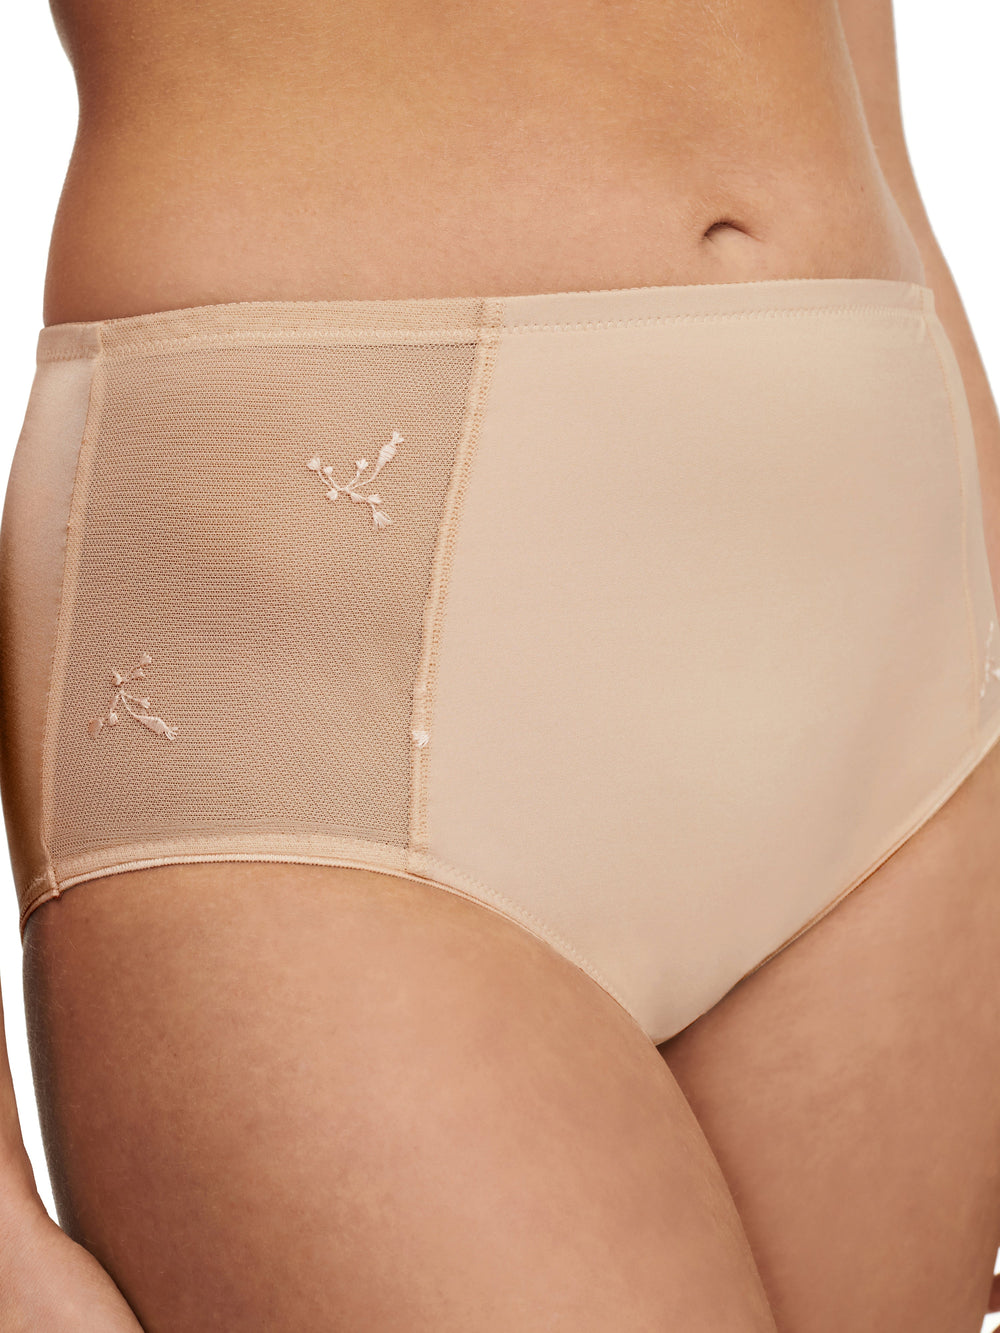 Chantelle - Every Curve High-Waisted Support Full Brief Golden Beige Full Brief Chantelle 